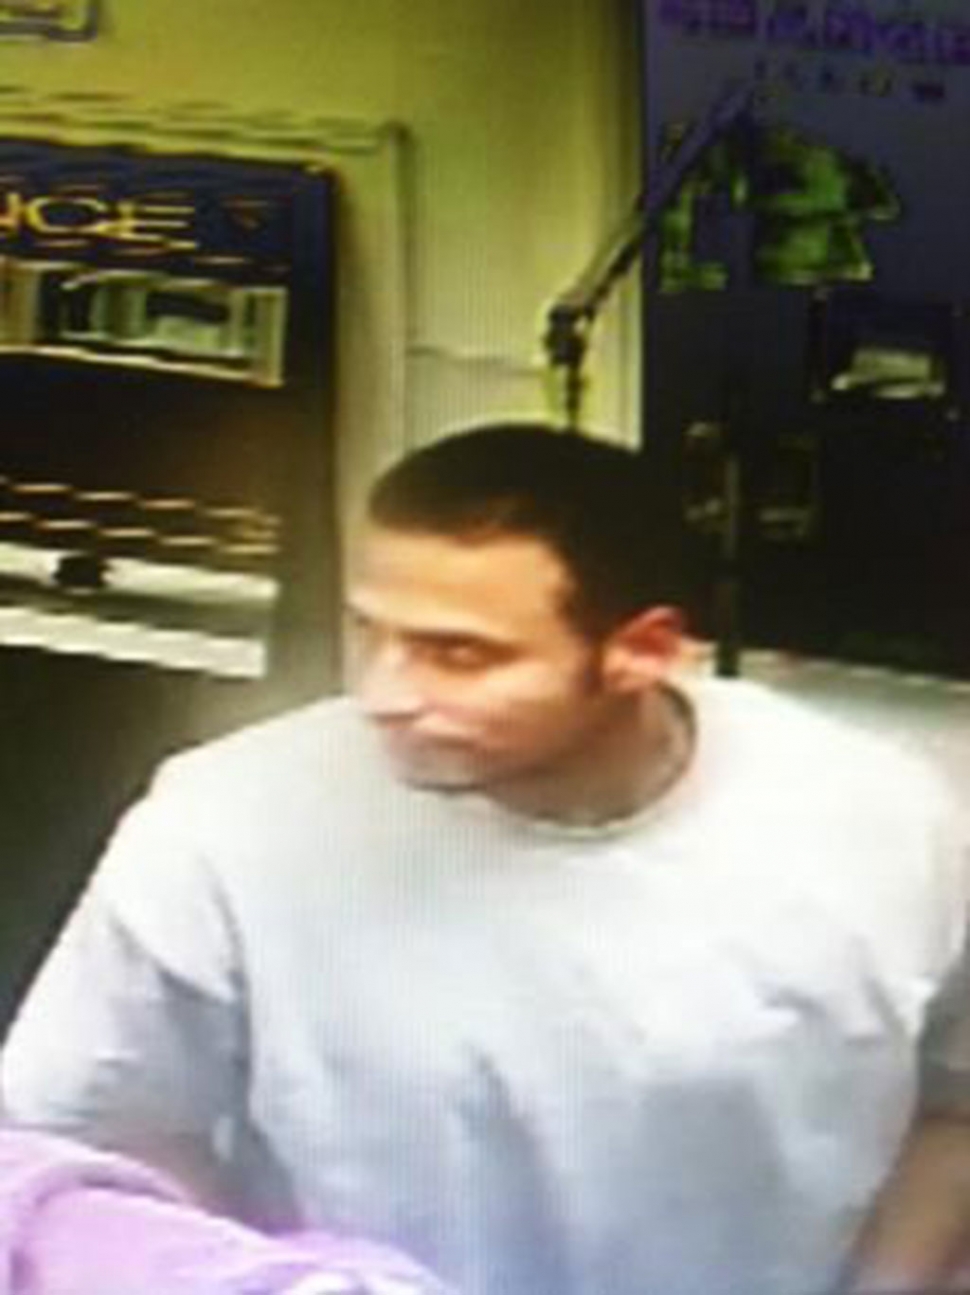 The Sheriff’s Office is requesting the public’s help in identifying this suspect.  Anyone who can help identify the suspect from the attached photographs is asked to call Det. Mulrooney at (805) 646-1414. 